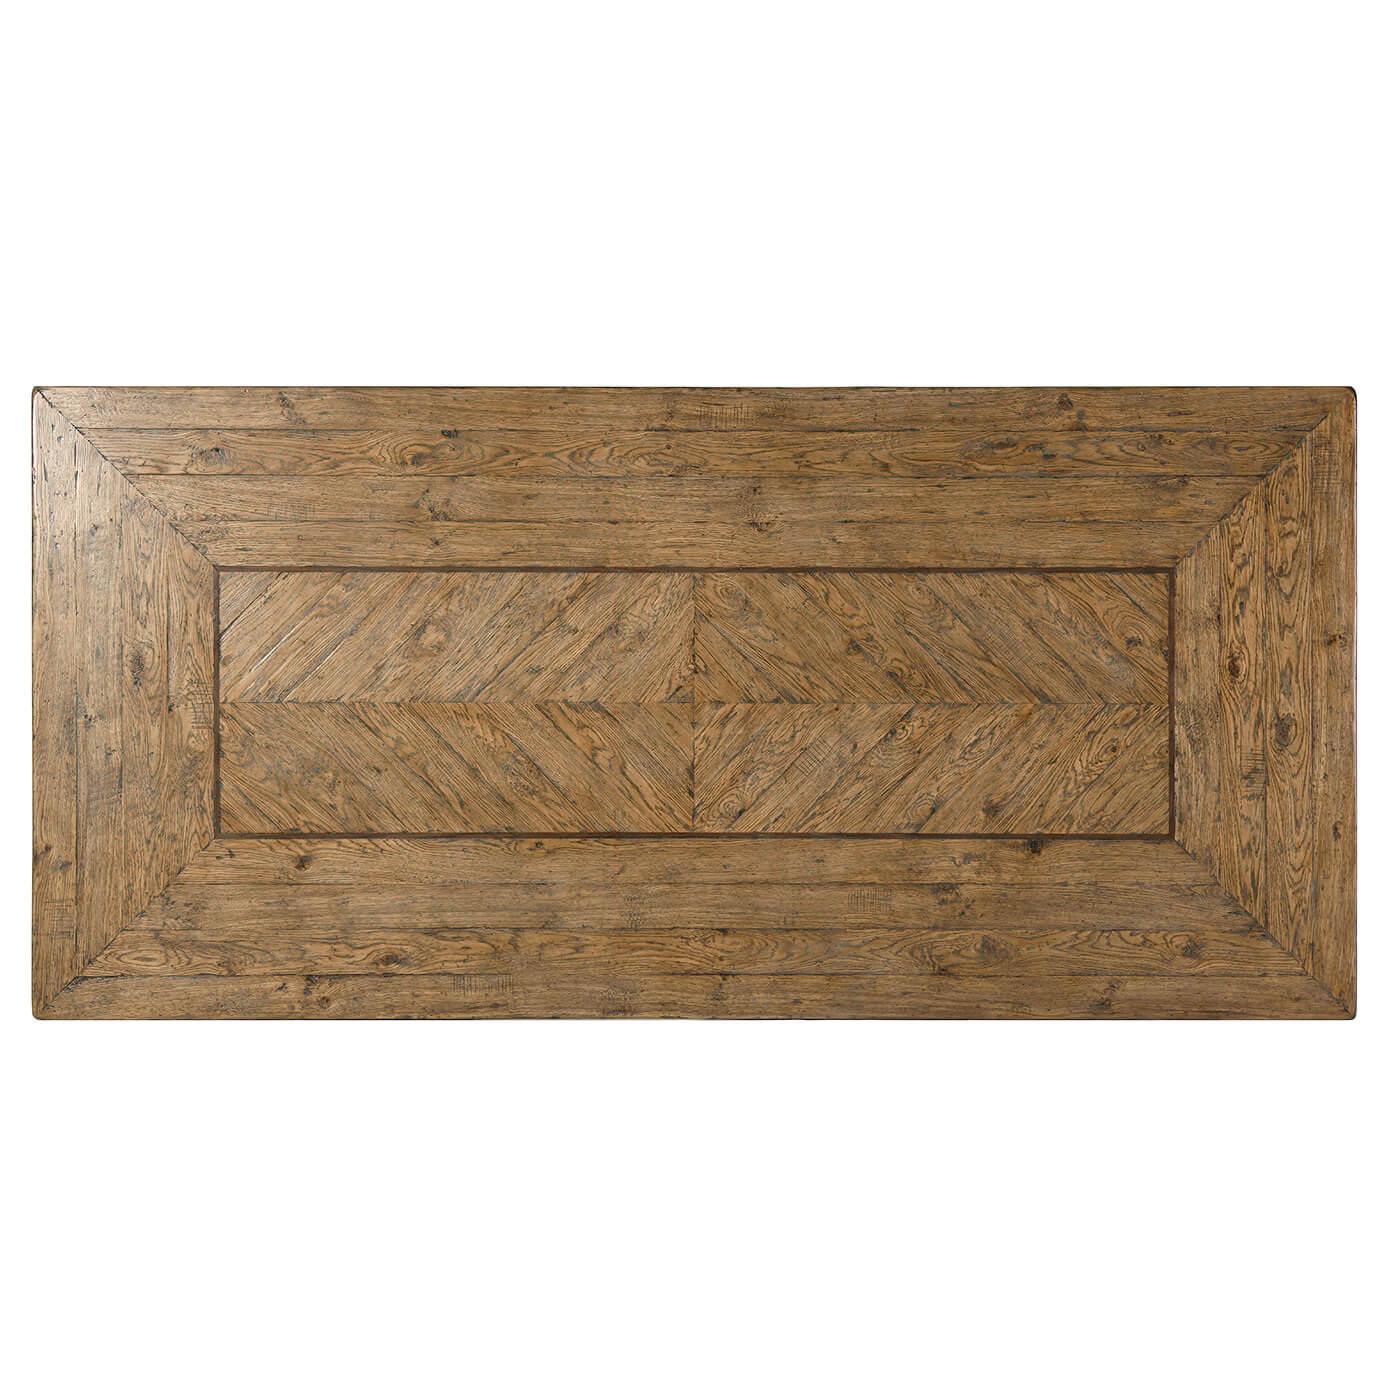 Rustic parquetry oak dining table with chevron panel details with a walnut line inlay and a vintage textured metal geometric trestle end base.

Dimensions: 88